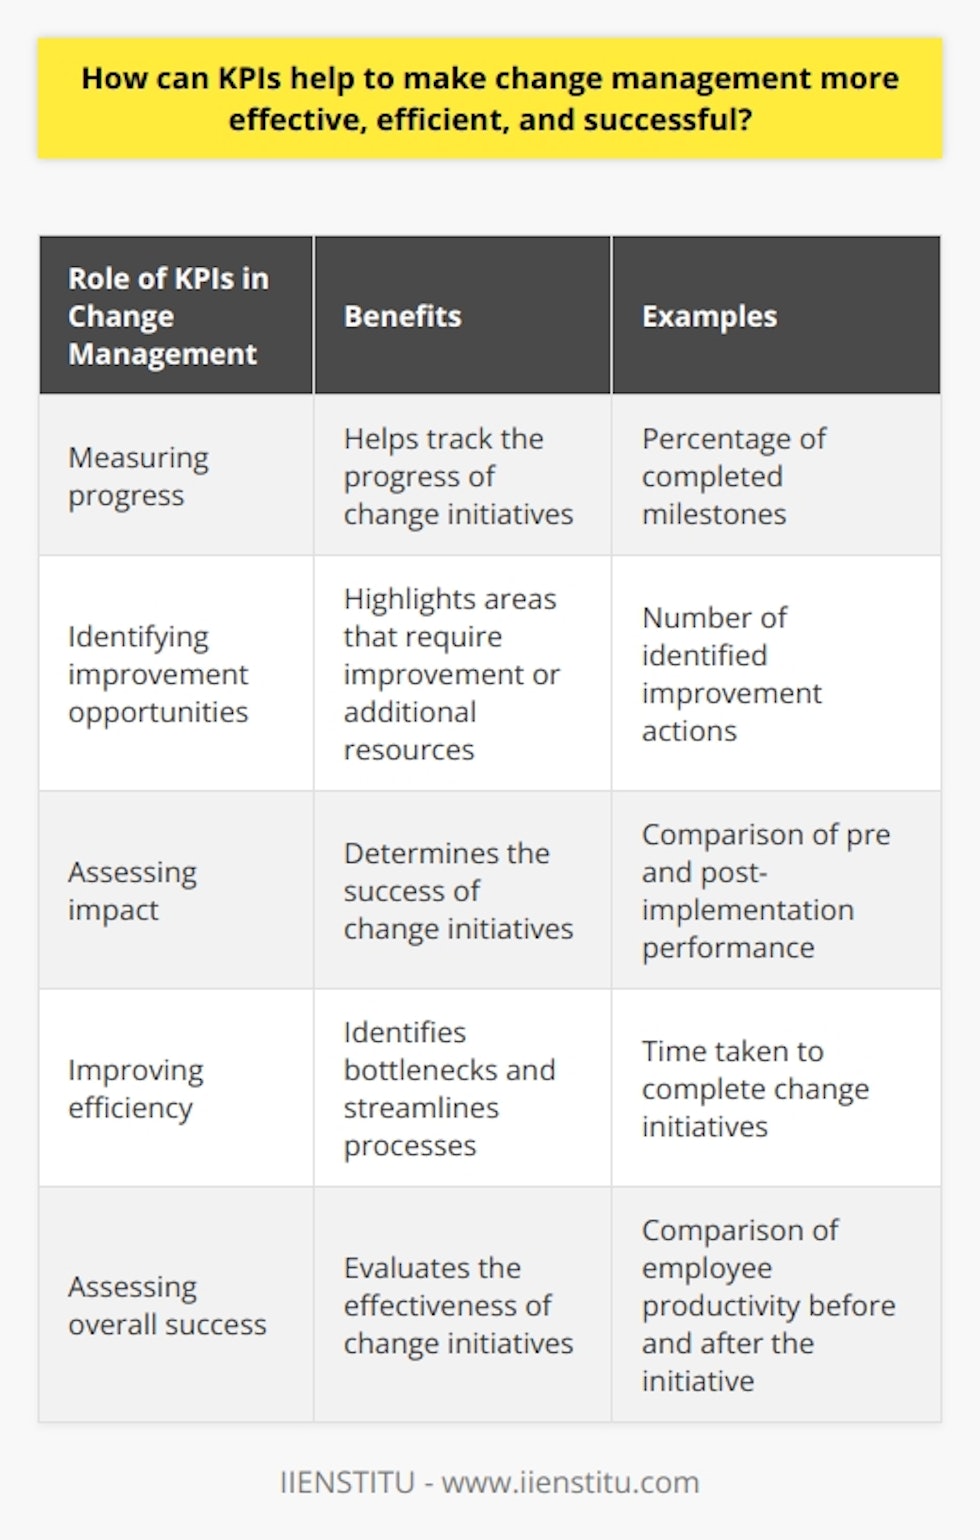 KPIs have a crucial role in making change management more effective, efficient, and successful. They provide a means of measuring the progress of change initiatives and identifying areas that require improvement or additional resources. By using the right KPIs, organizations can ensure that their change initiatives are on track and delivering the desired results.One significant aspect of KPIs is their ability to assess the impact of change initiatives on an organization. By comparing pre and post-implementation performance, organizations can determine whether the initiative has been successful. If there is an improvement in performance, it indicates that the change initiative is effective. However, if there is a decline in performance, the initiative needs to be re-evaluated.Efficiency is another area where KPIs can be instrumental. If a change initiative is taking longer than anticipated, KPIs can help identify bottlenecks and areas for improvement. By streamlining processes or reallocating resources, organizations can make their change initiatives more efficient, saving time and resources in the process.Ultimately, KPIs are essential for assessing the overall success of a change initiative. By measuring organizational performance and employee productivity before and after the initiative, organizations can determine its effectiveness. If there is an improvement in performance, it signifies a successful change initiative. Conversely, a decline in performance indicates a need for re-evaluation.In conclusion, KPIs play a fundamental role in change management by measuring progress, identifying improvement opportunities, and assessing the impact of change initiatives. By utilizing KPIs effectively, organizations can ensure the success, efficiency, and effectiveness of their change initiatives.